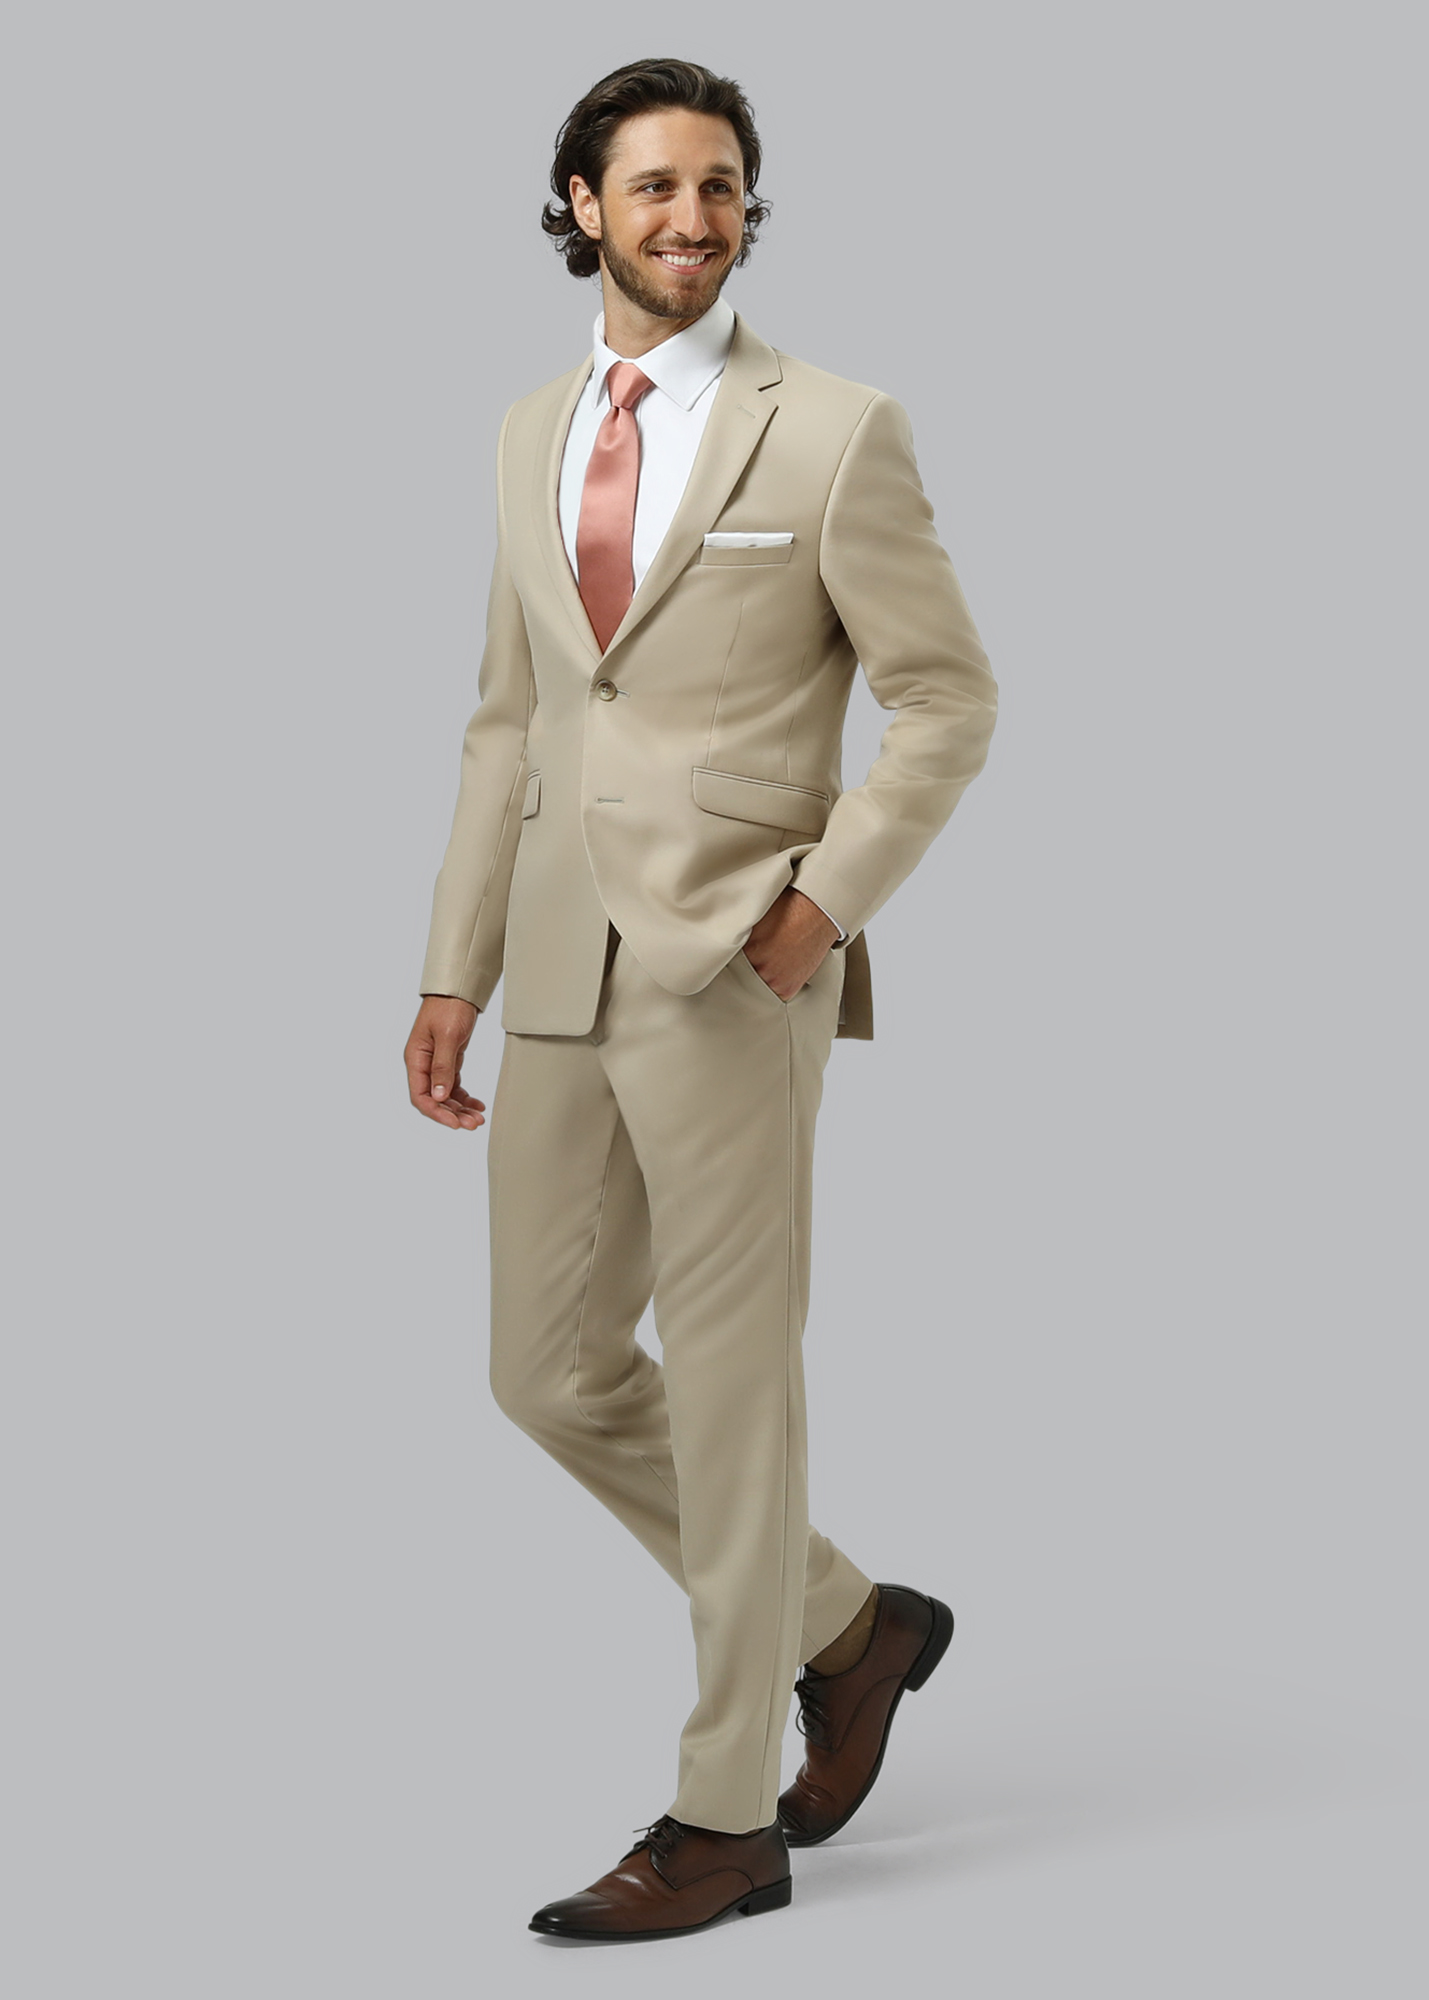 Tan Suit Rental - Free Shipping & Replacements | Menguin